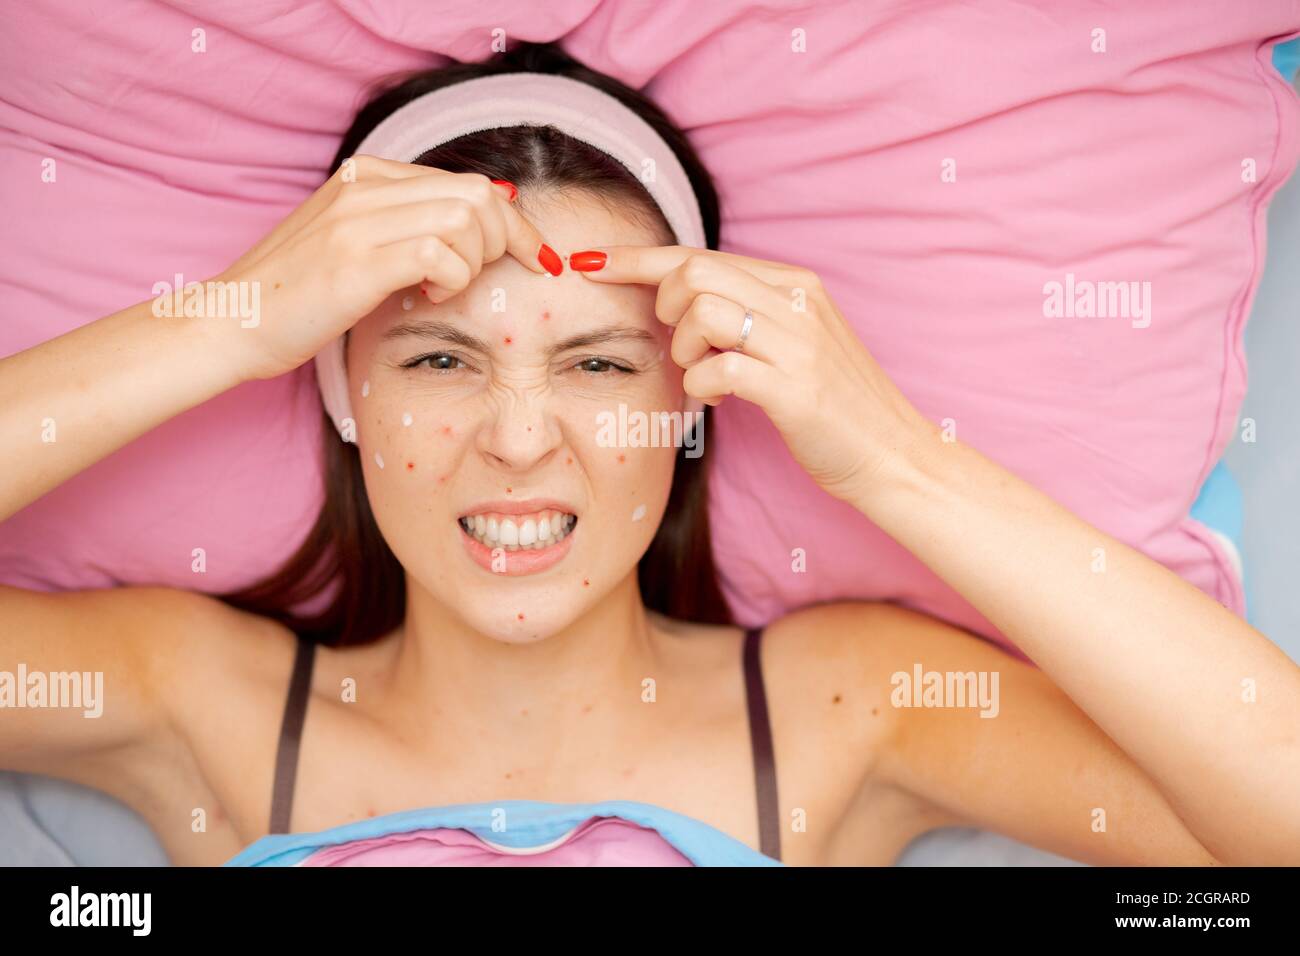 Skin of face of young woman is affected by chickenpox, acne defects Stock Photo